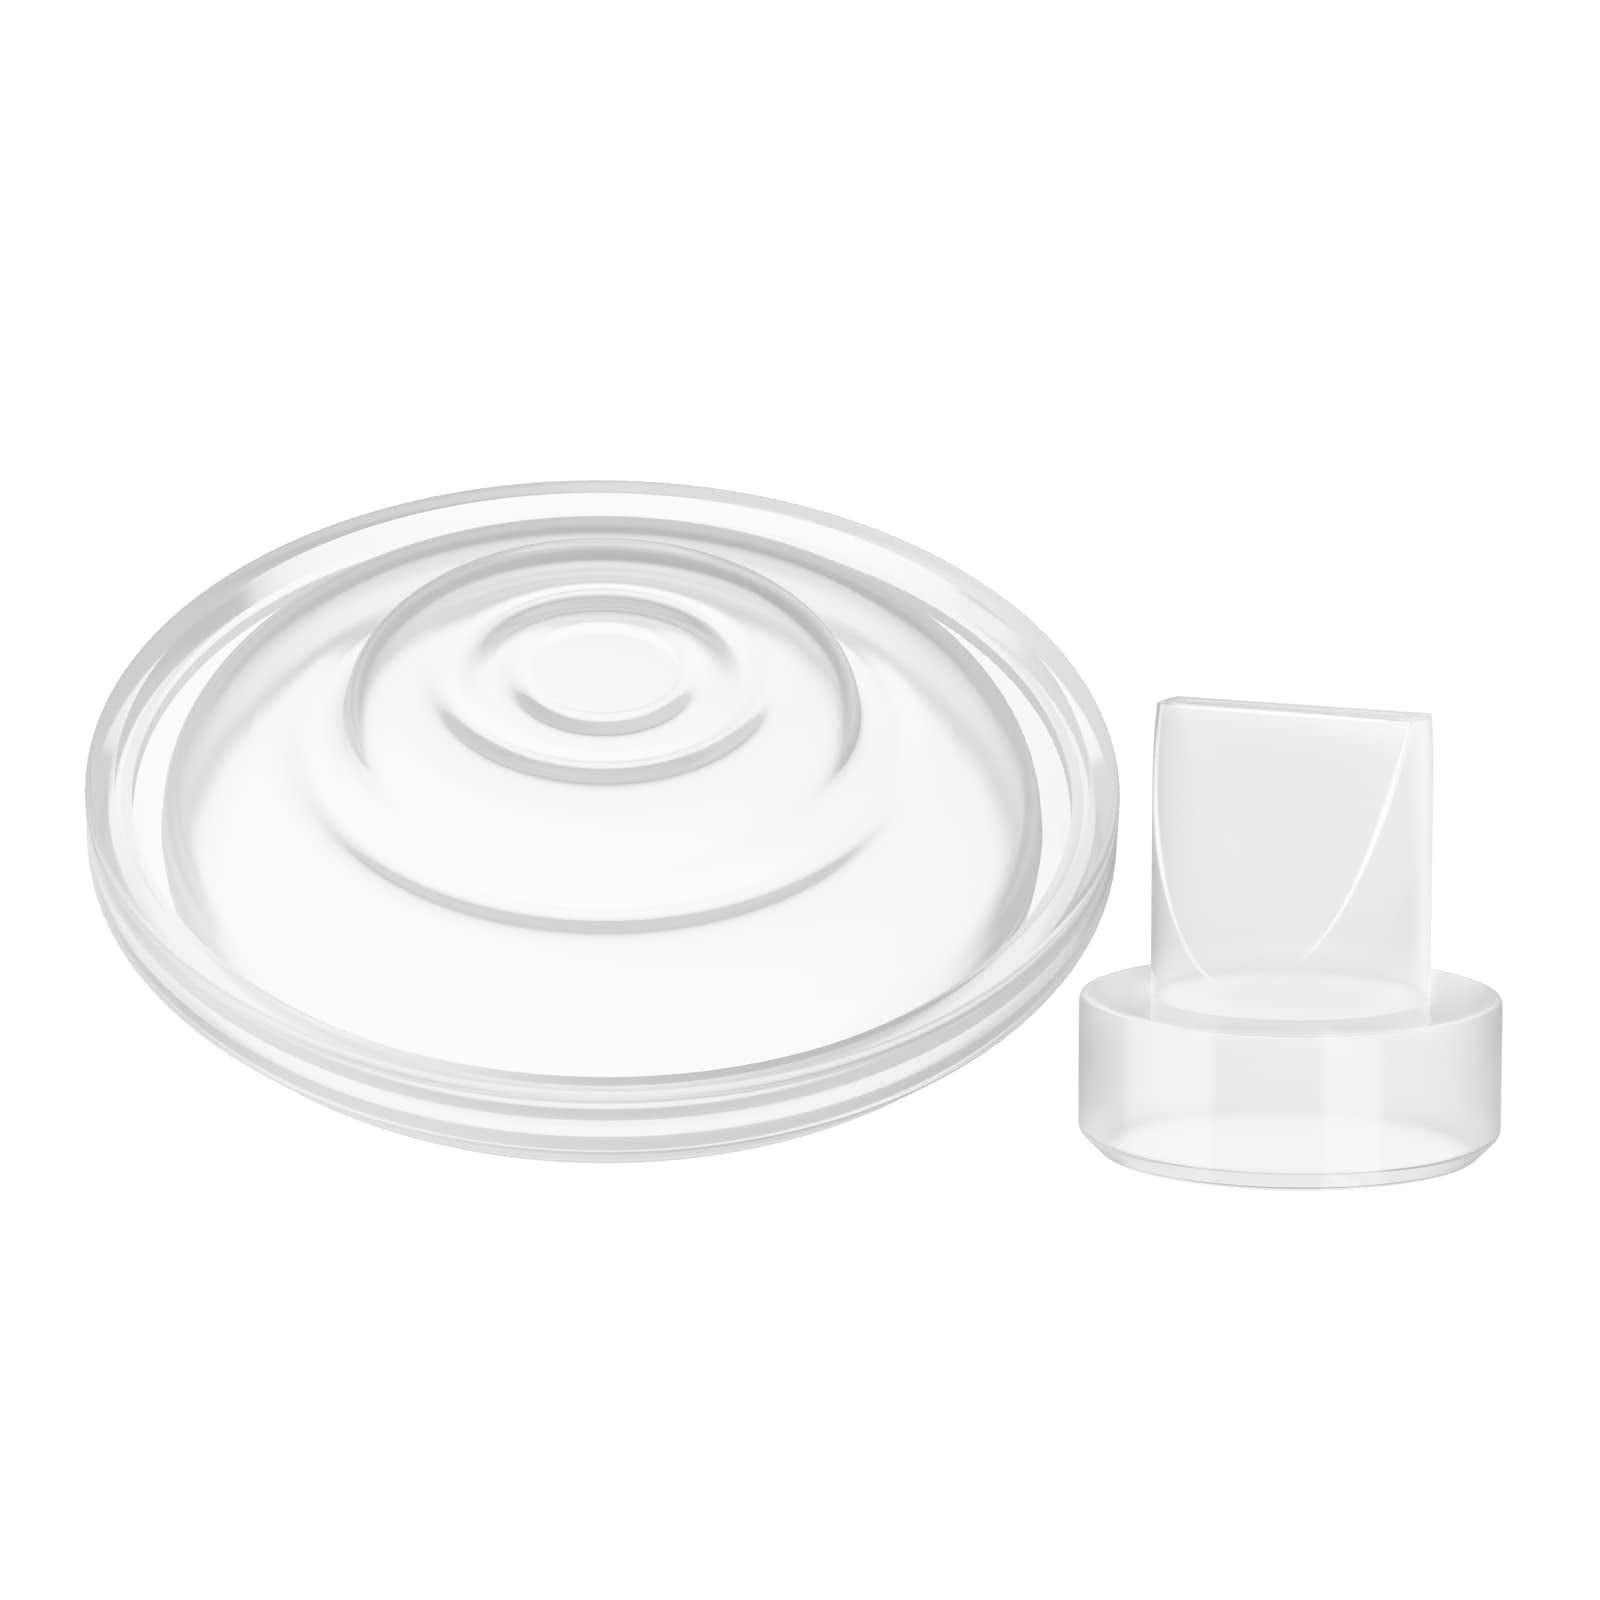 Momcozy Duckbill Valves & Silicone Diaphragm Compatible with Momcozy M5.  Original Momcozy M5 Breast Pump Replacement Accessories, 1 Pack